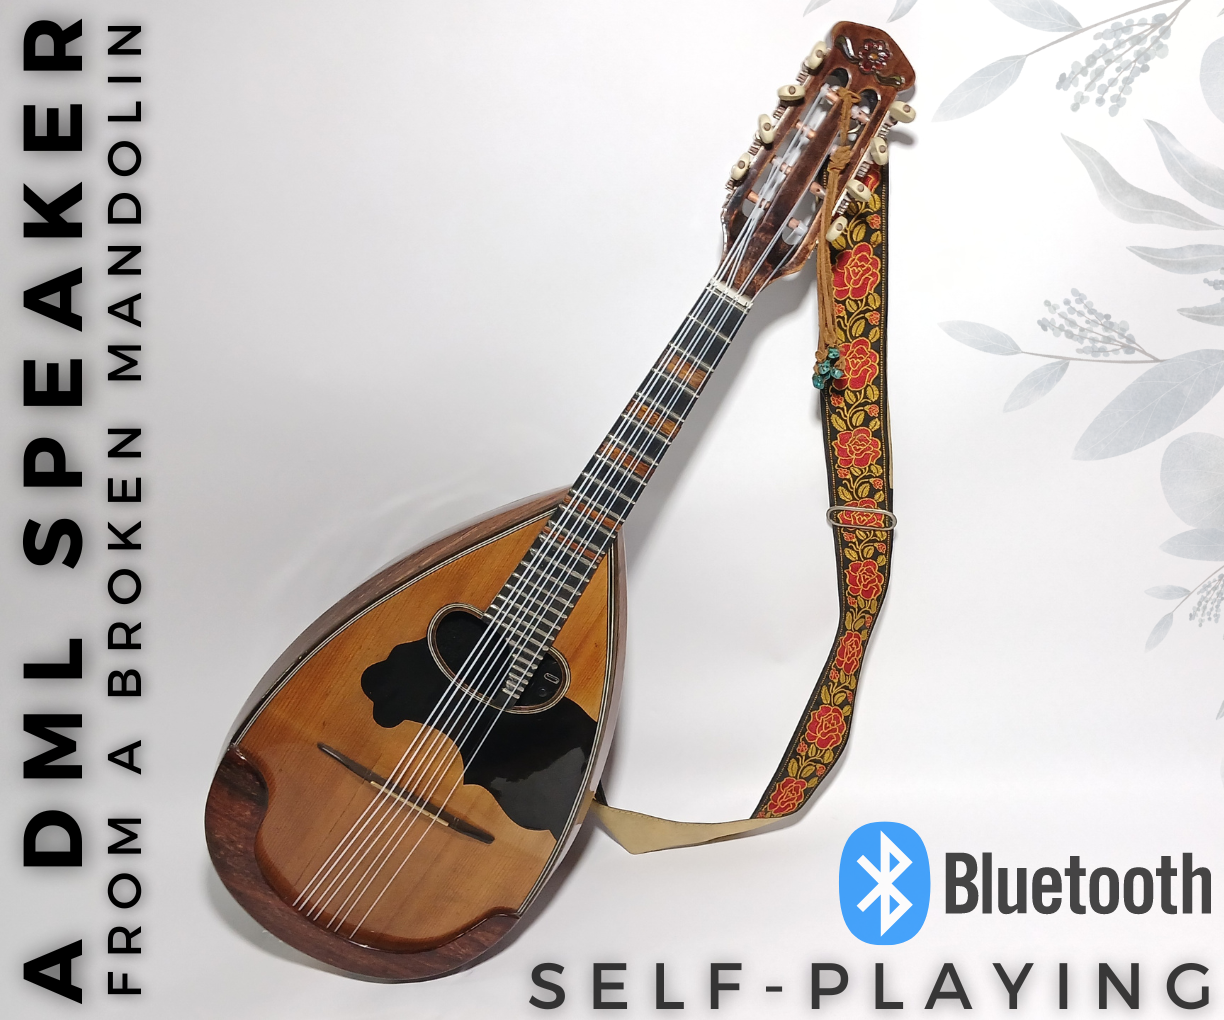 Restore Broken String Instruments and Make Them "Self-Playing"!